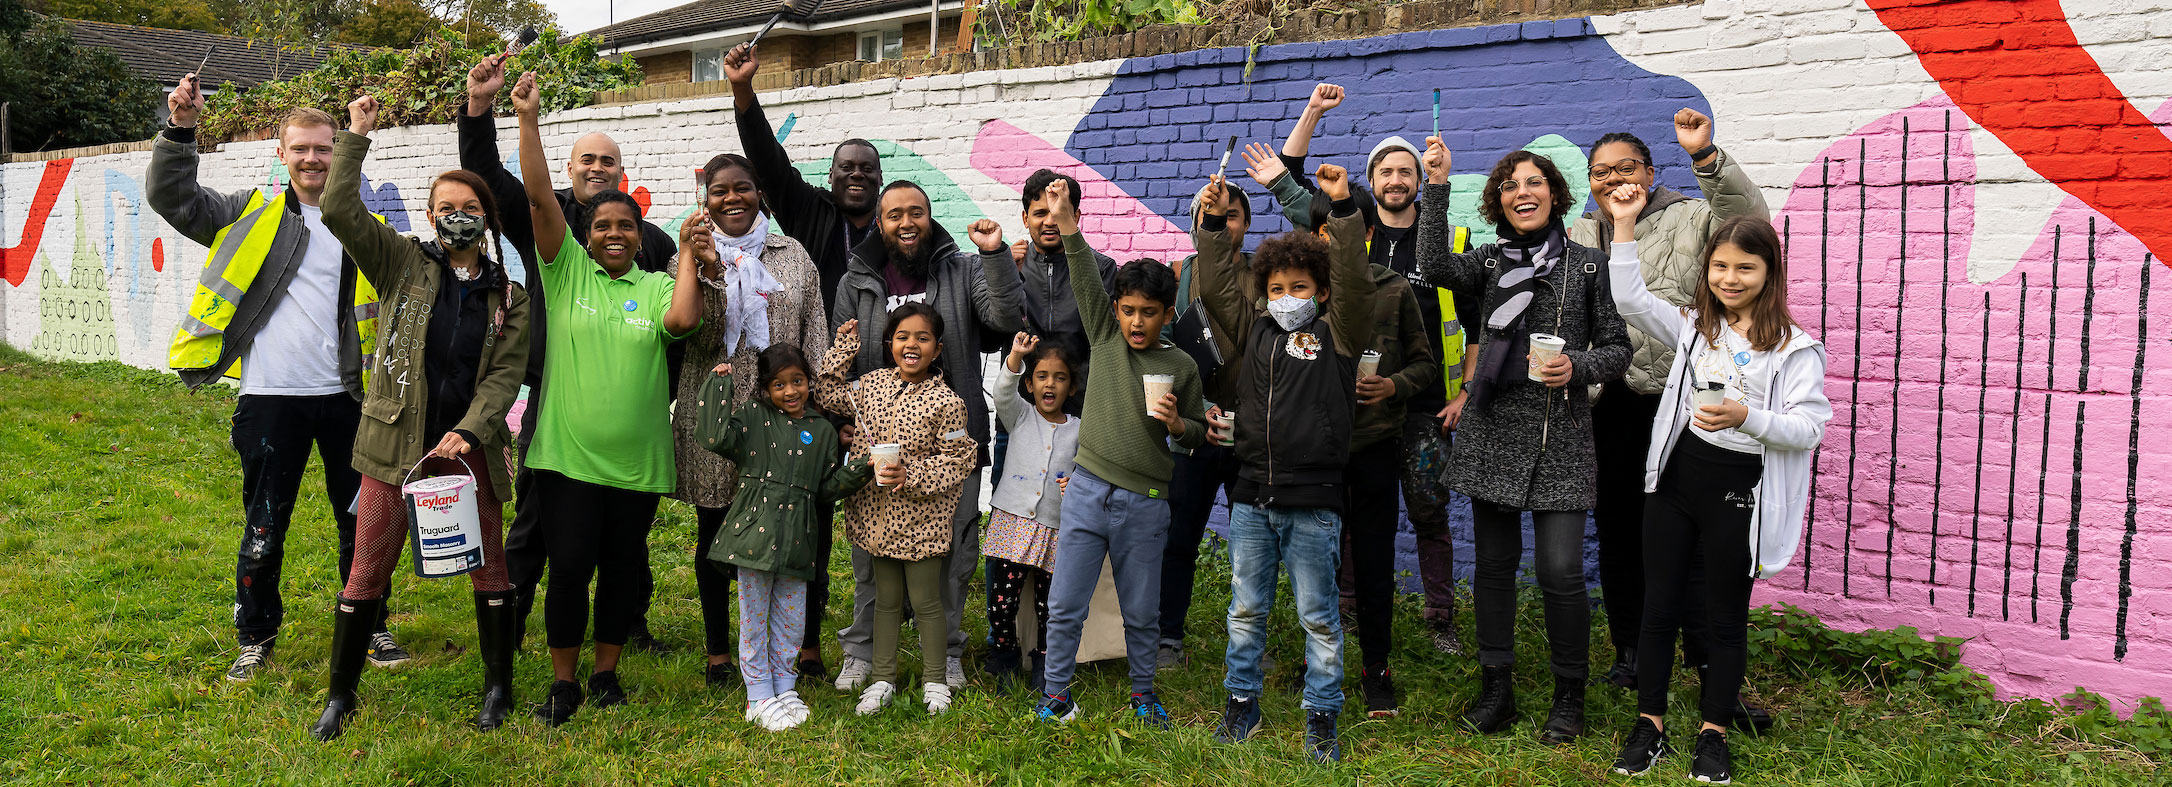 Participants at the plaistow mural painting event